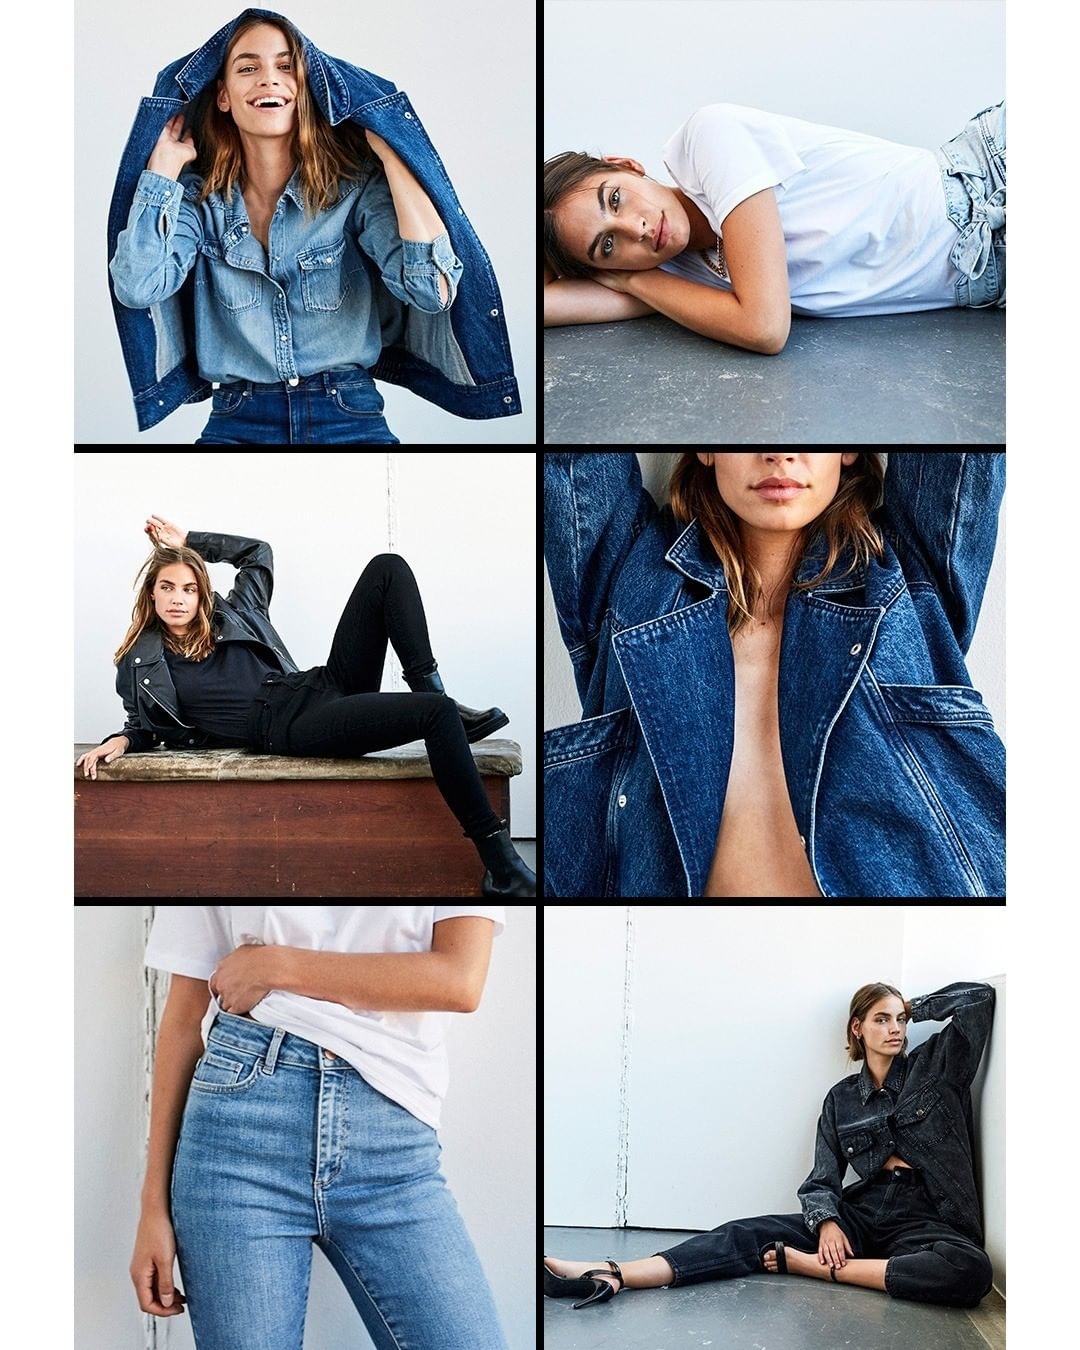 VERO MODA India - #DenimOnRepeat  You probably own a pair of jeans but denim is so much more. 
It’s jackets, shirts, shorts, skirts and dresses. Which style are you going to try next? 

Explore our Au...